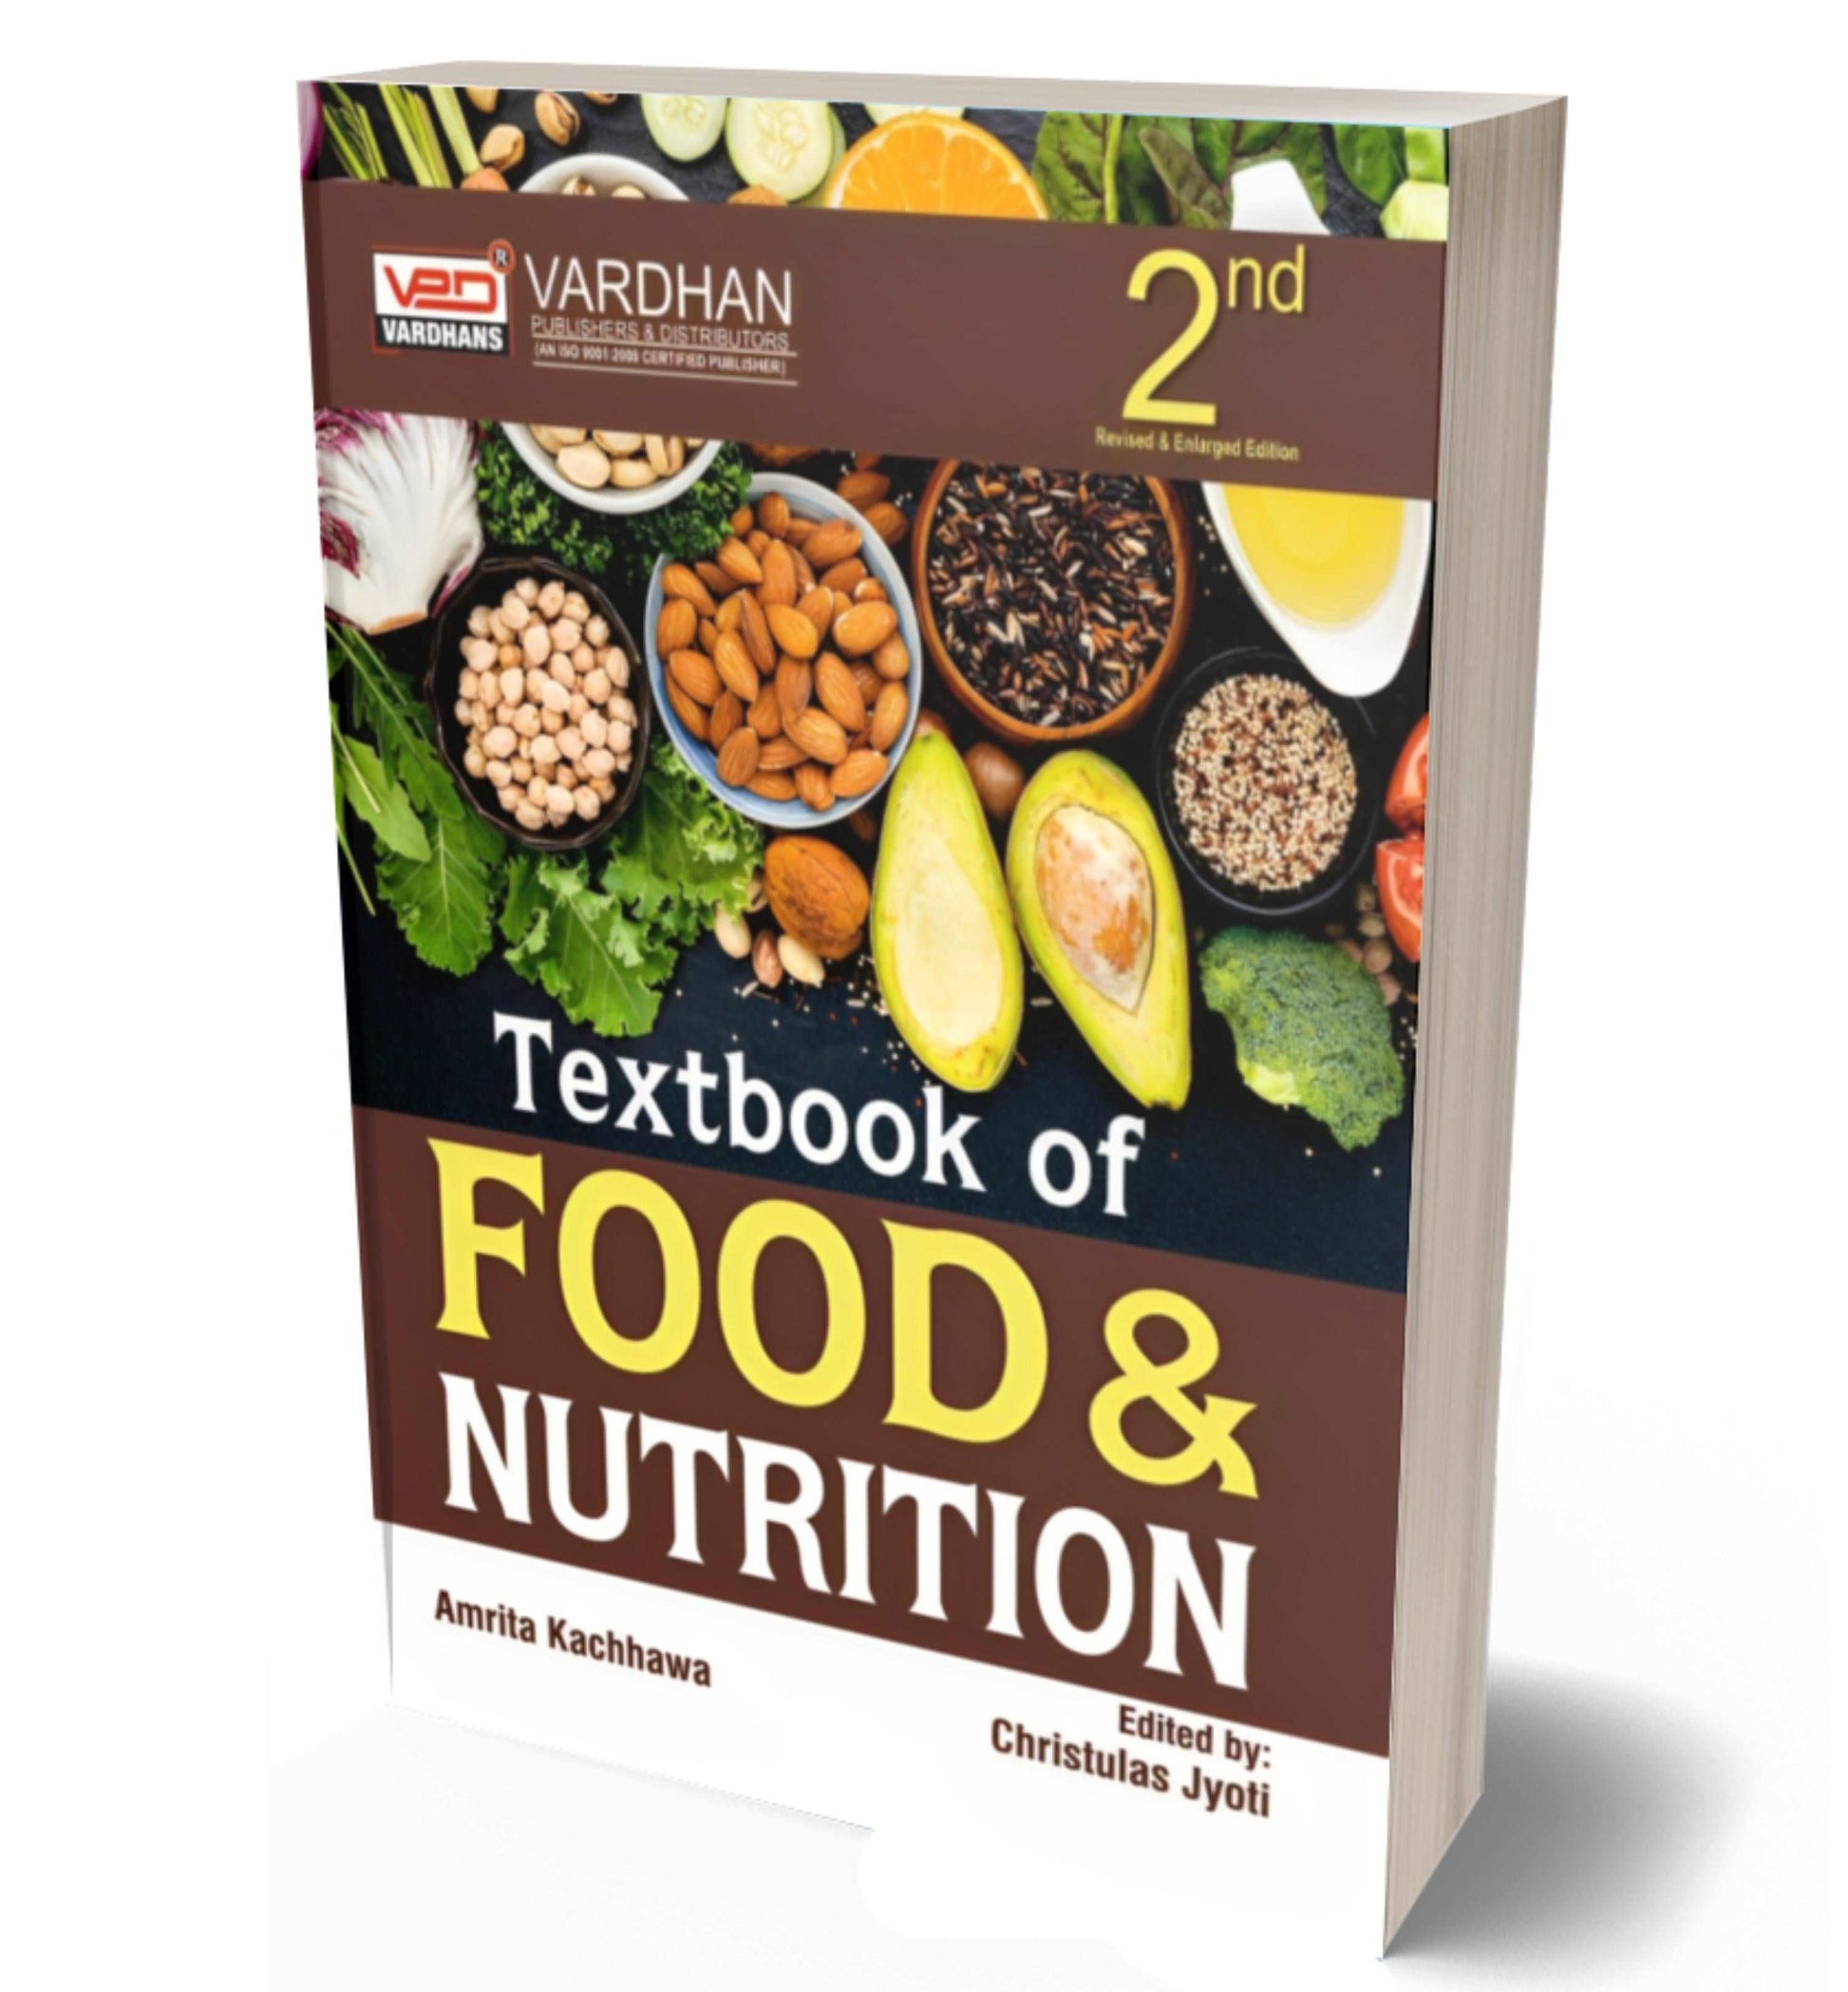 Textbook of Food & Nutrition